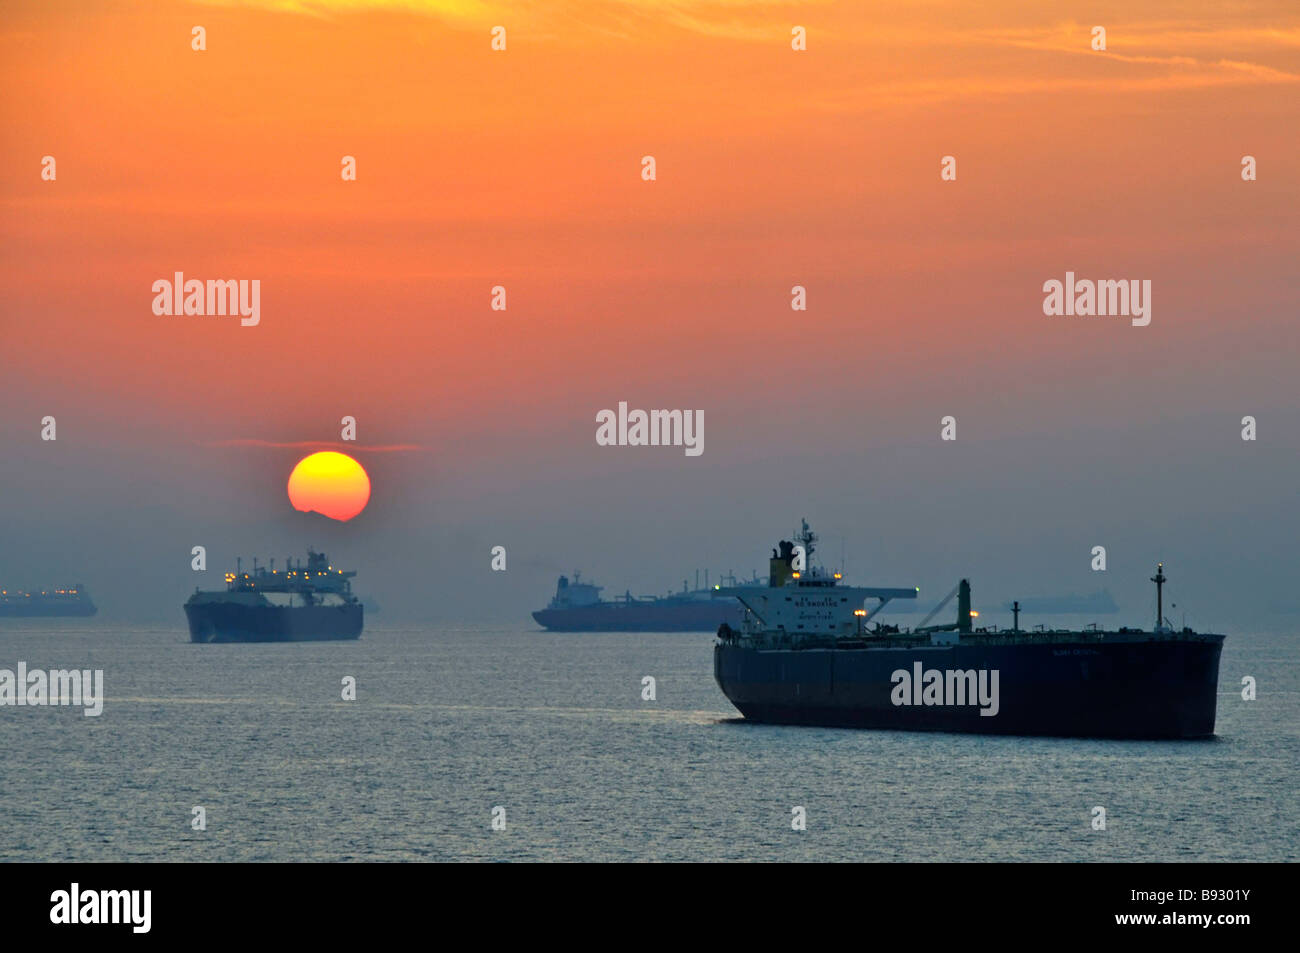 Sunset haze & shipping including bulk carriers & oil tankers at sea anchorage off coast of Fujairah Gulf of Oman near Straits of Hormuz in Middle East Stock Photo